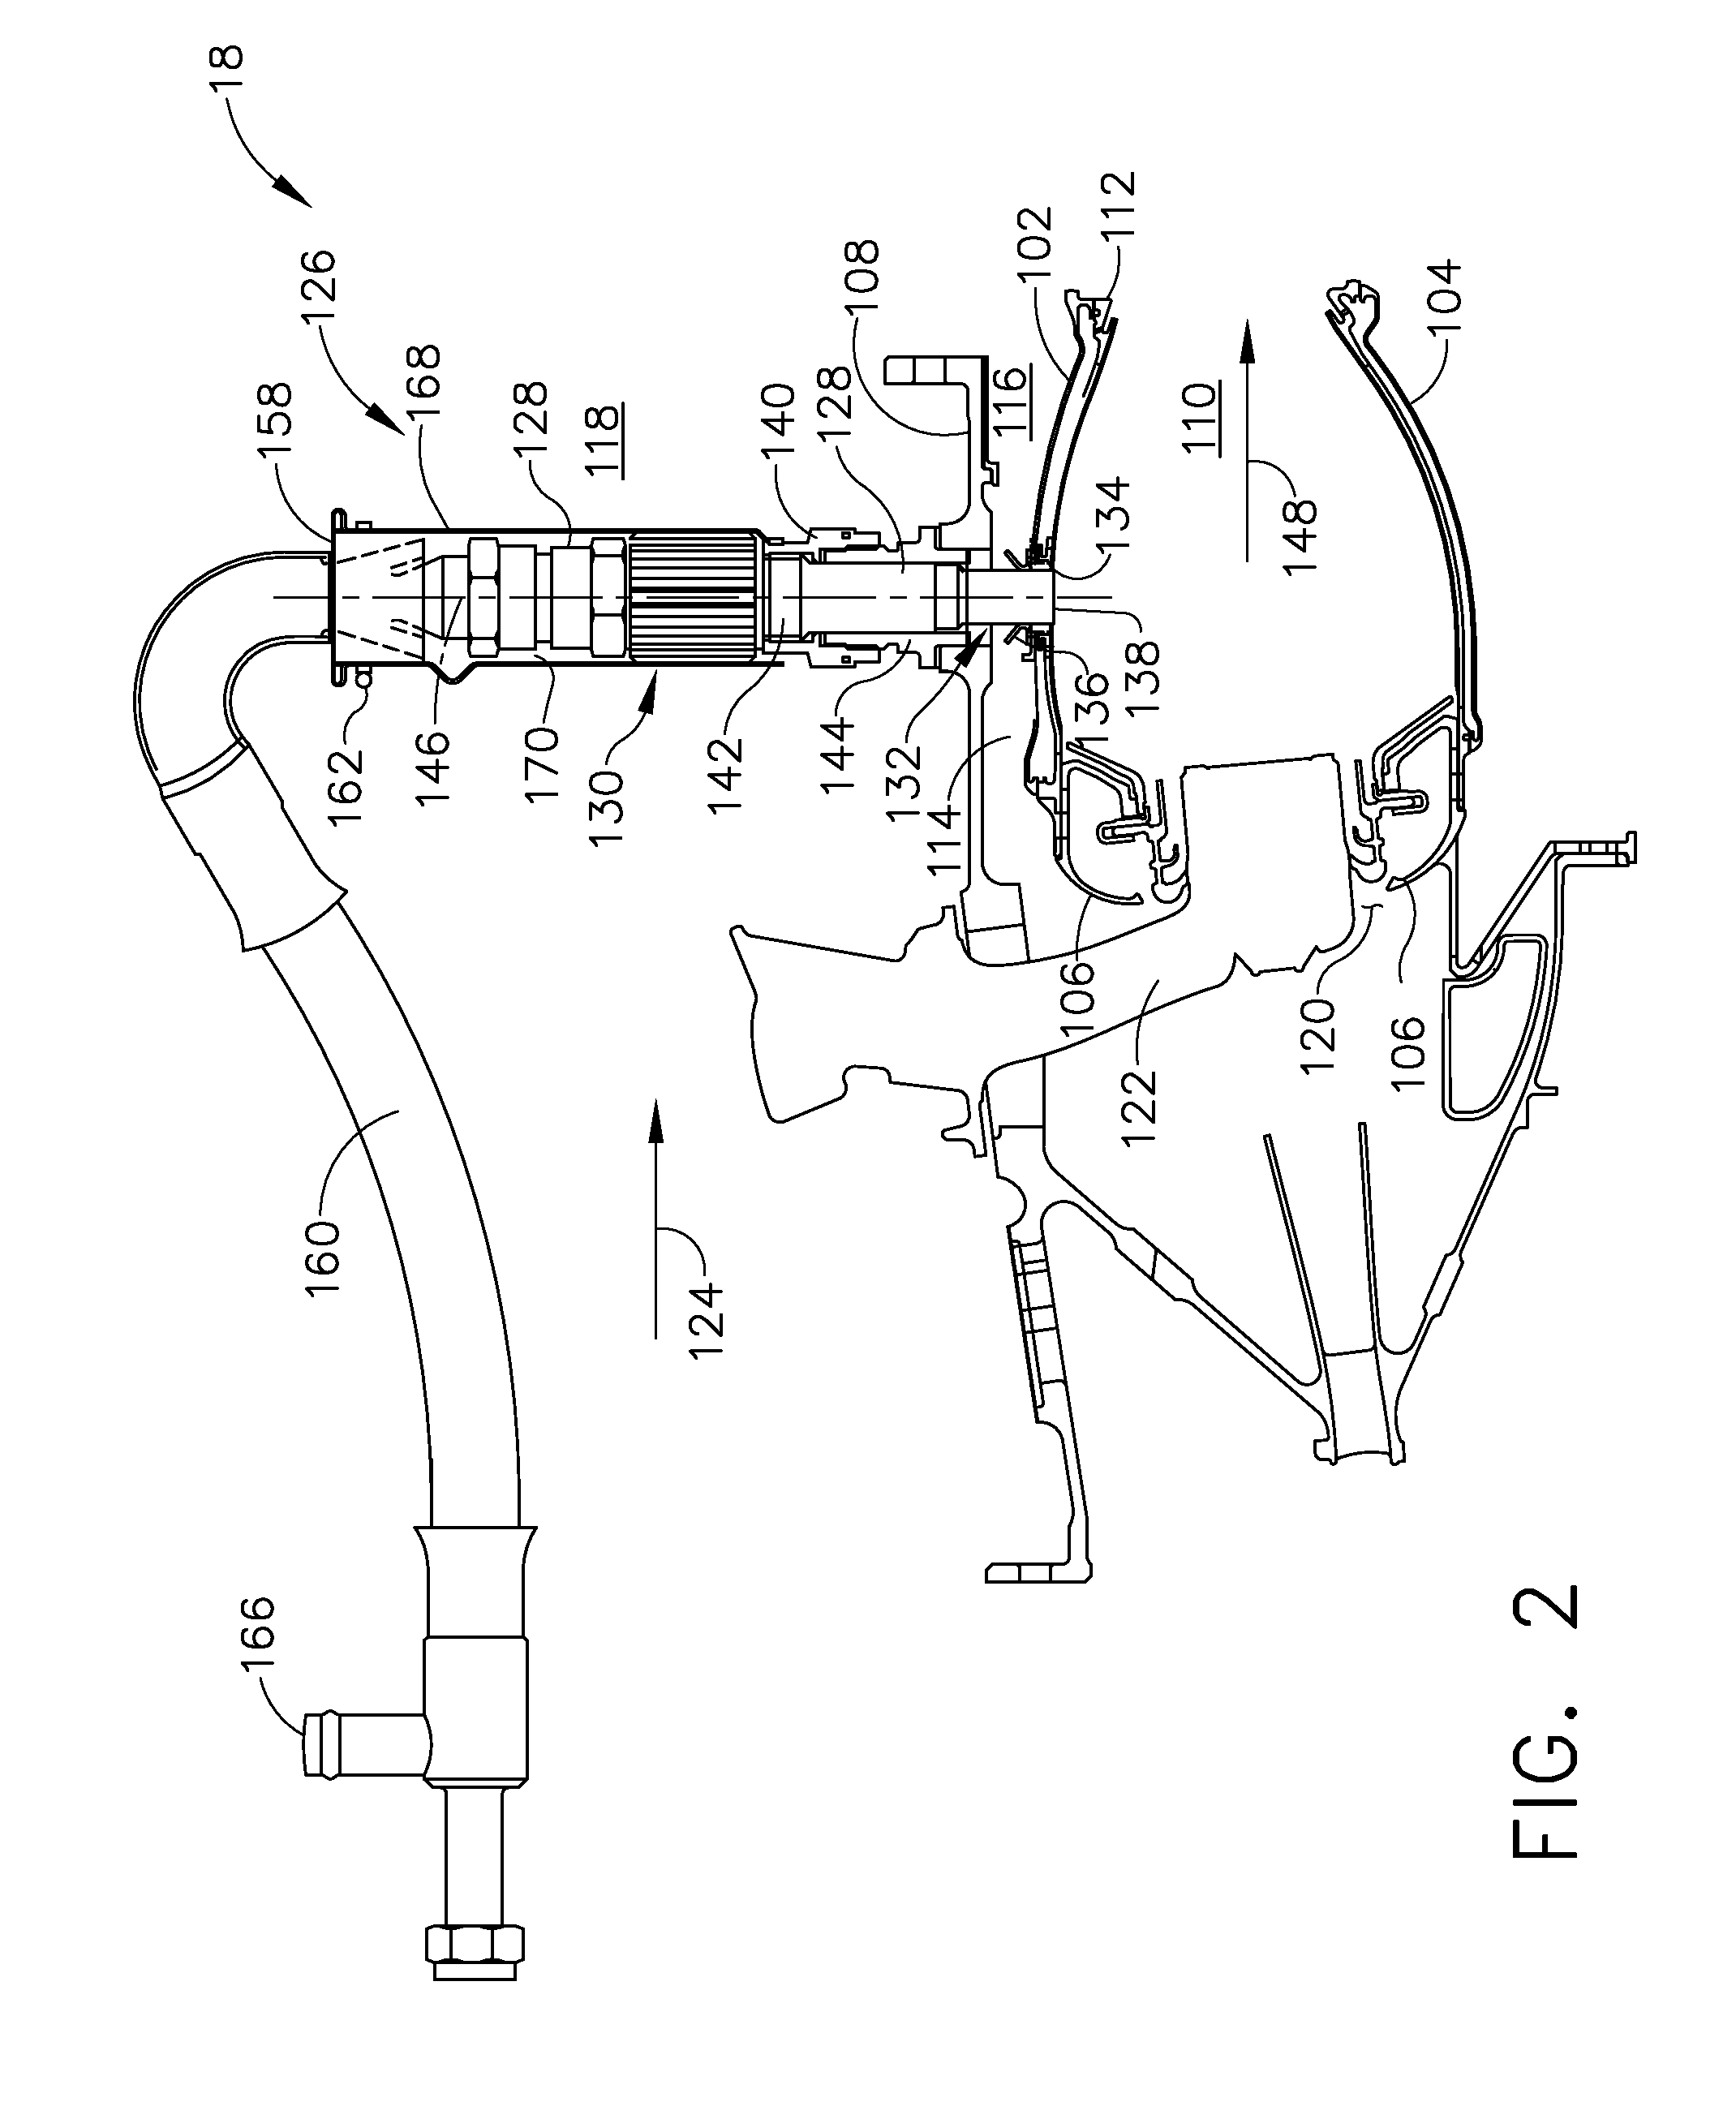 Fuel igniter assembly having heat-dissipating element and methods of using same